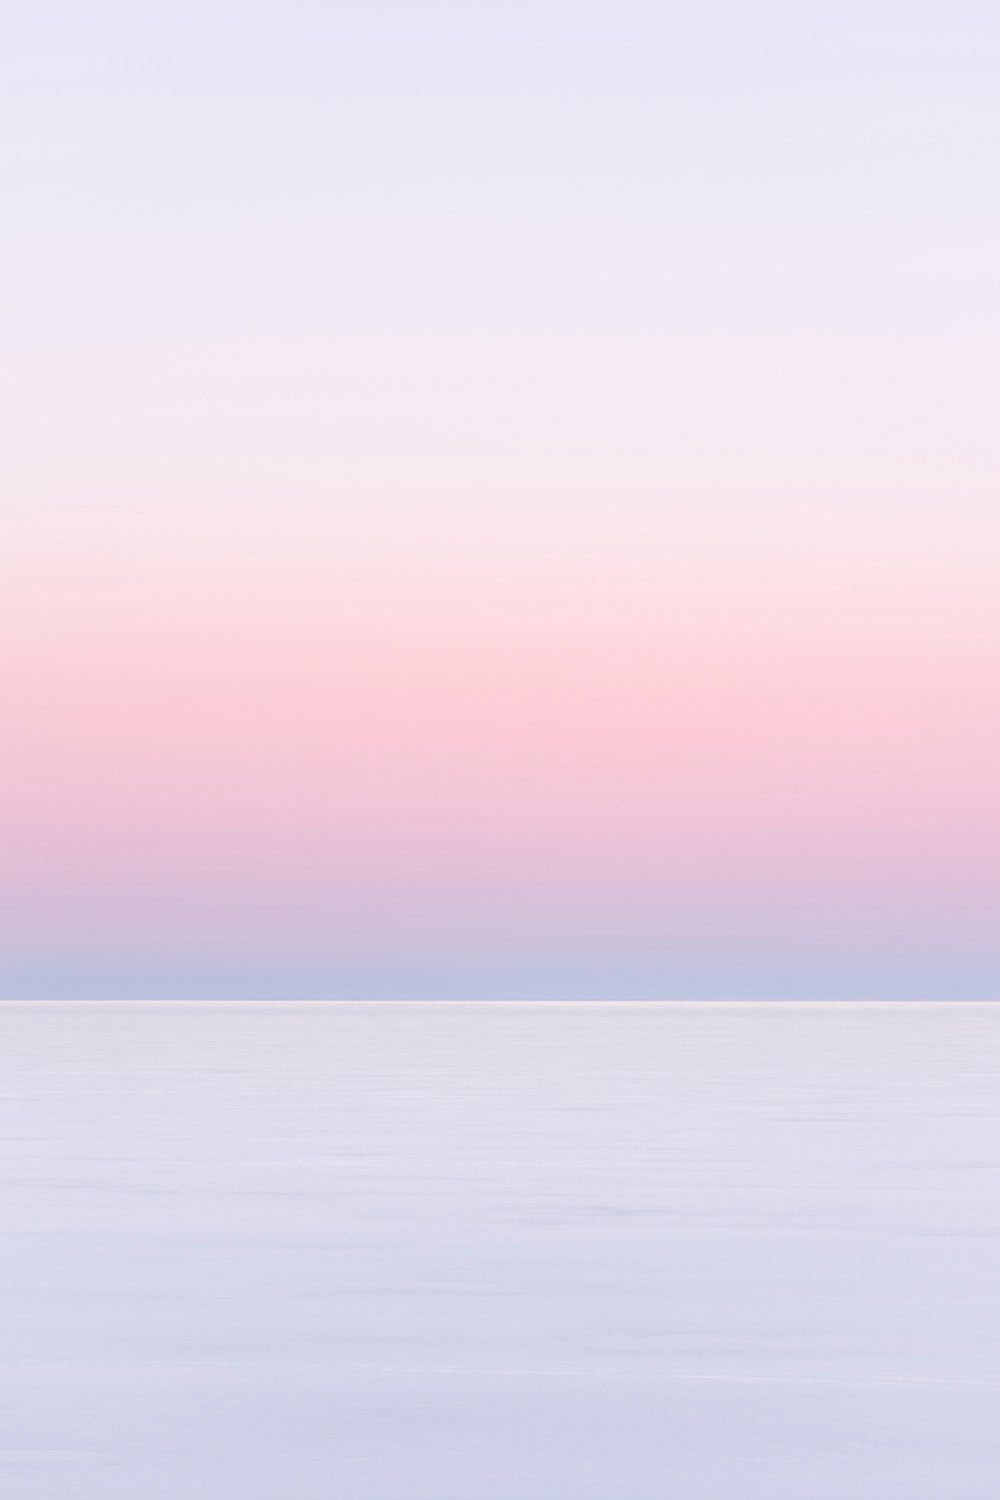 white and pink sky over the sea